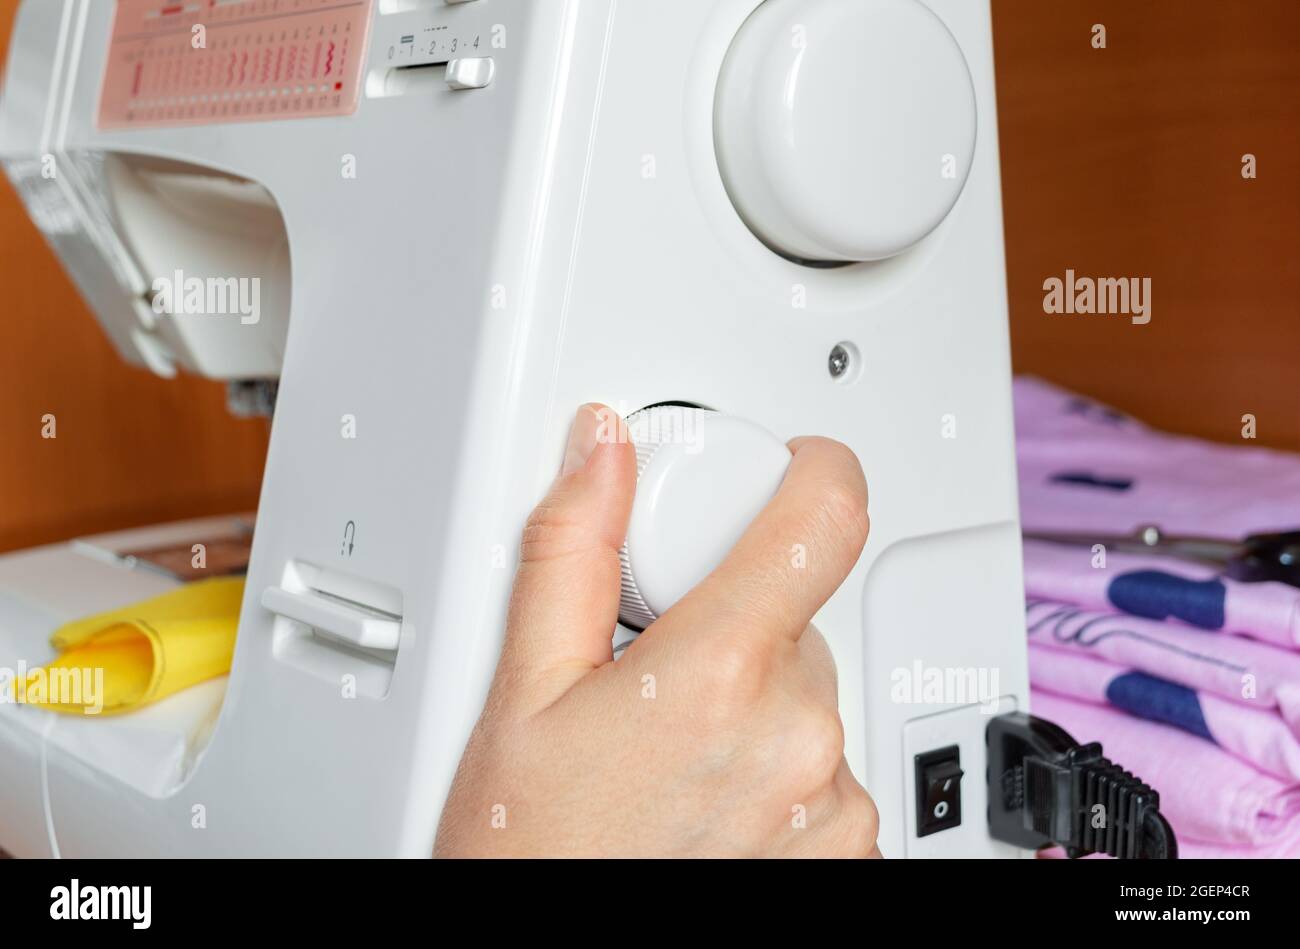 The hand turns the wheel of the sewing machine to adjust the stitch type, close-up. Stock Photo